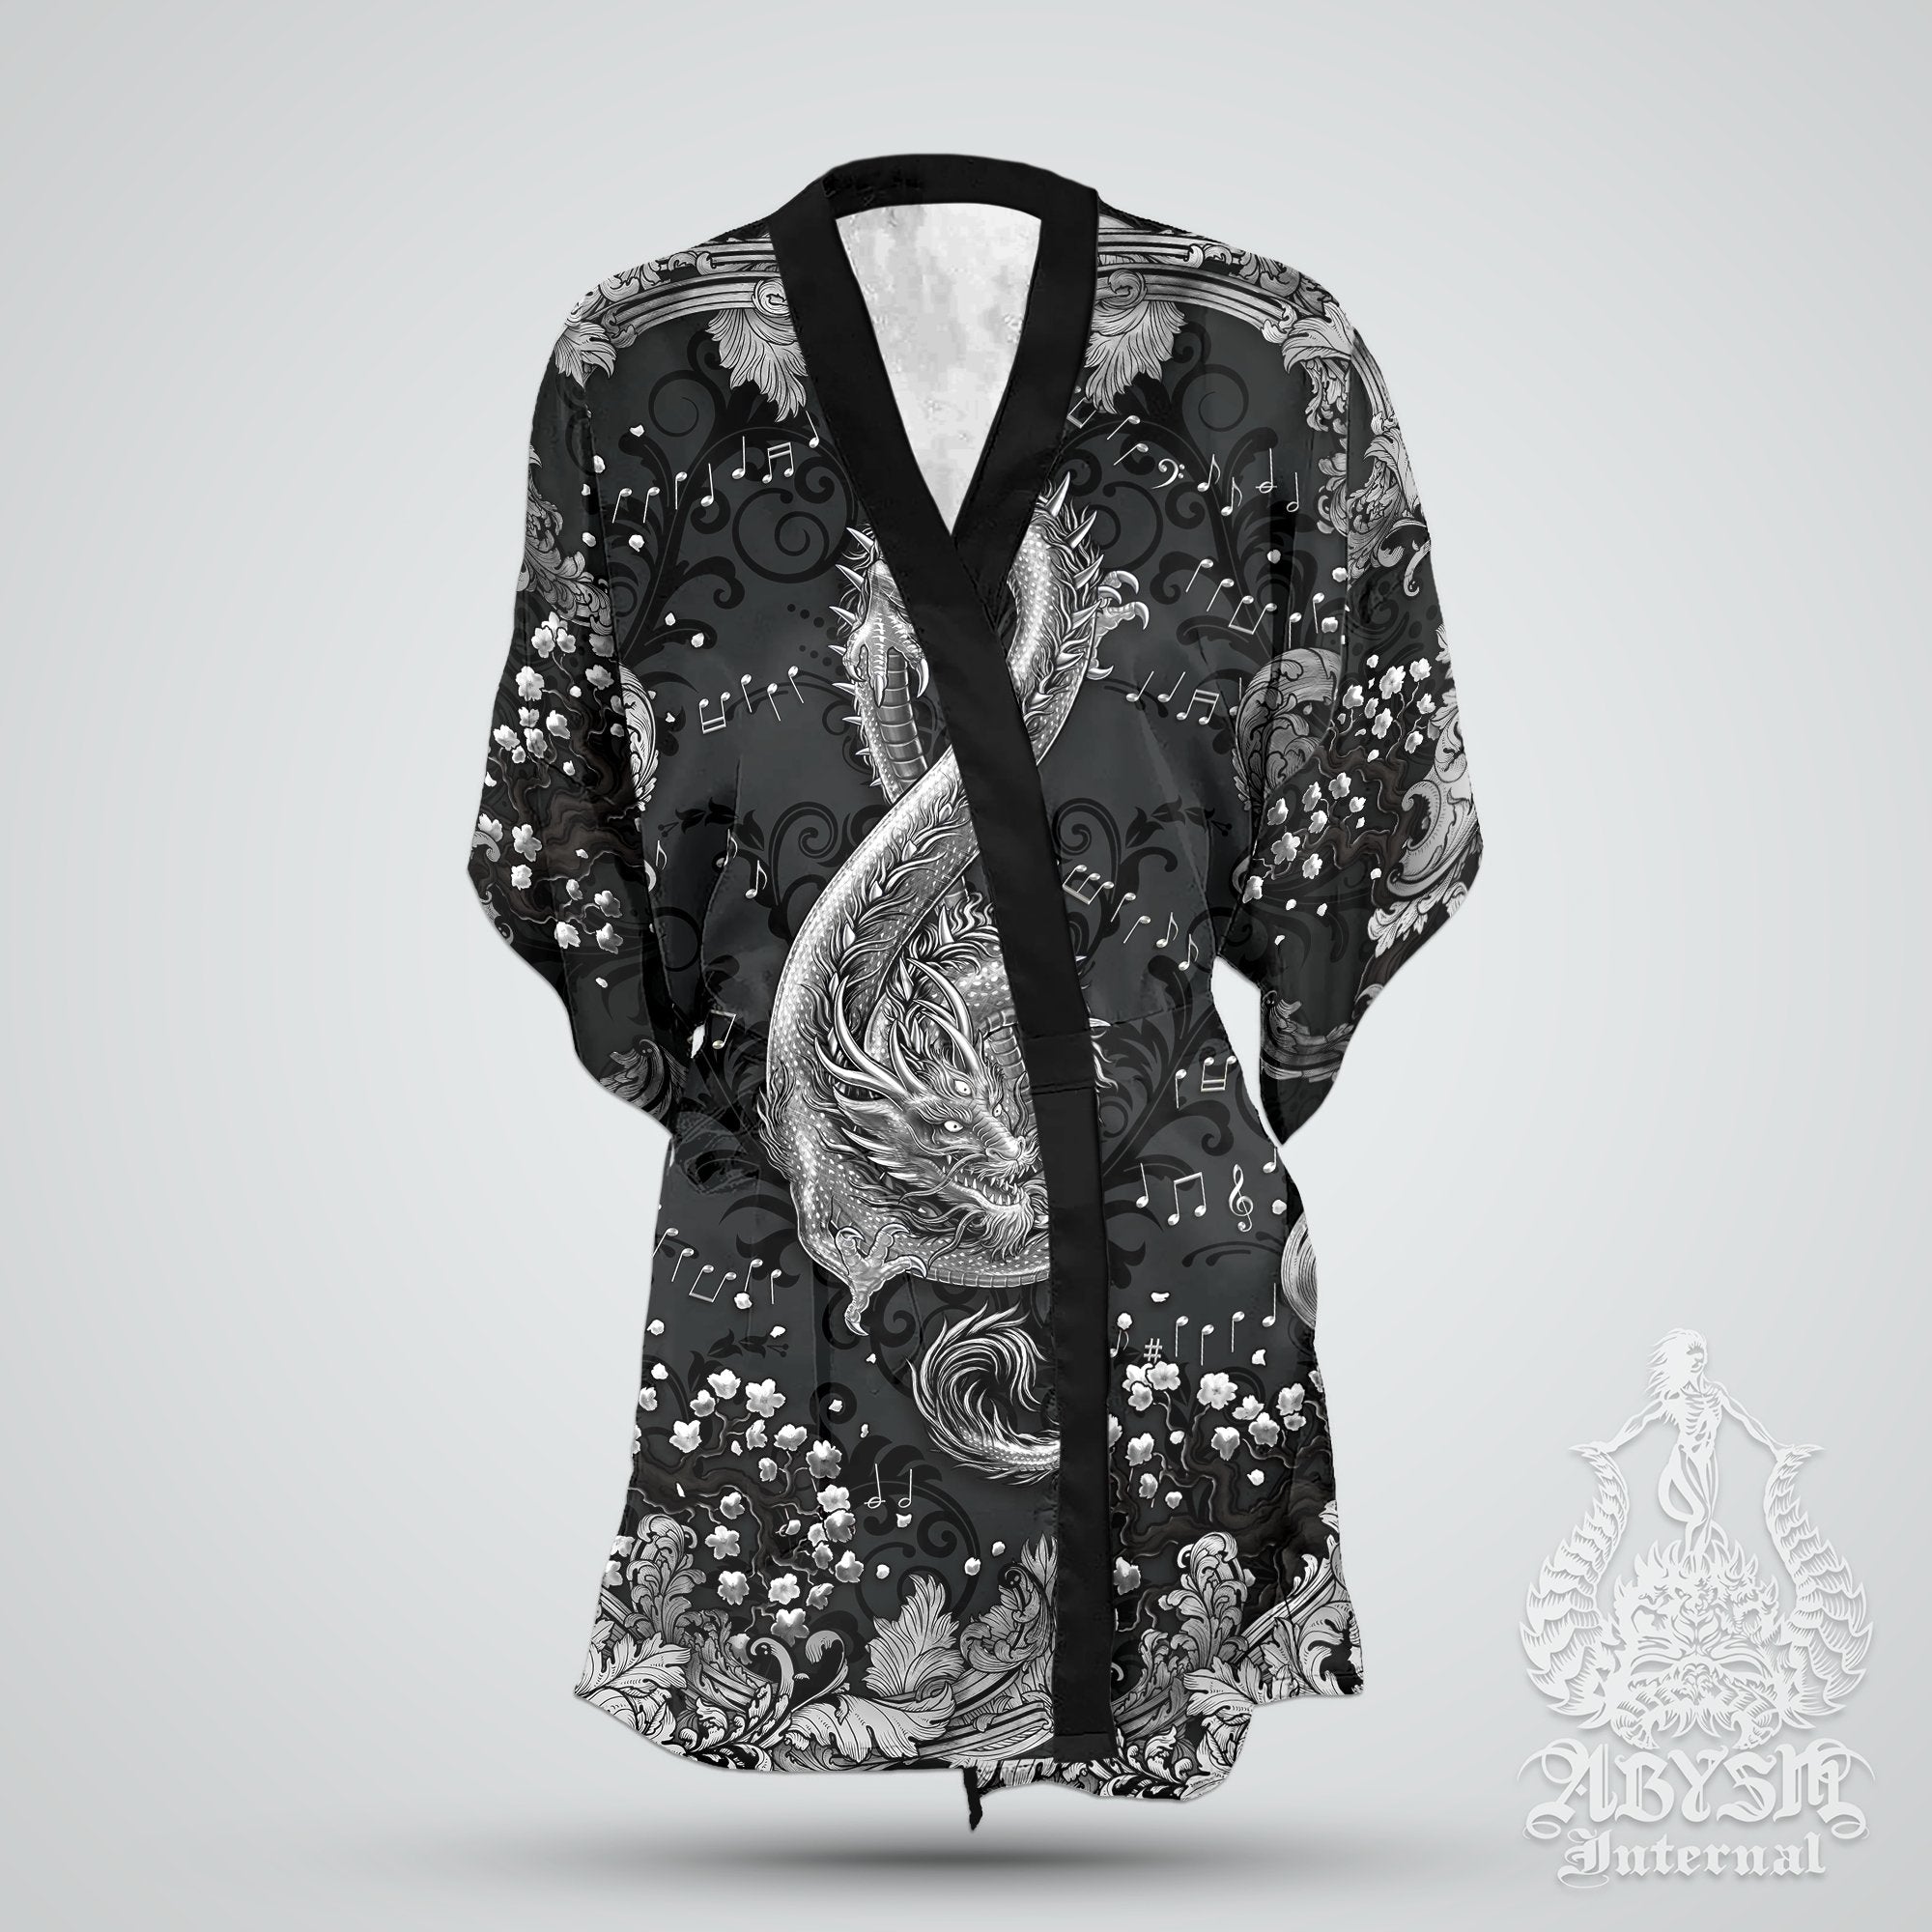 Music Cover Up, Beach Outfit, Party Kimono, Summer Festival Robe, Indie and Alternative Clothing, Unisex - Dragon, Silver Black - Abysm Internal